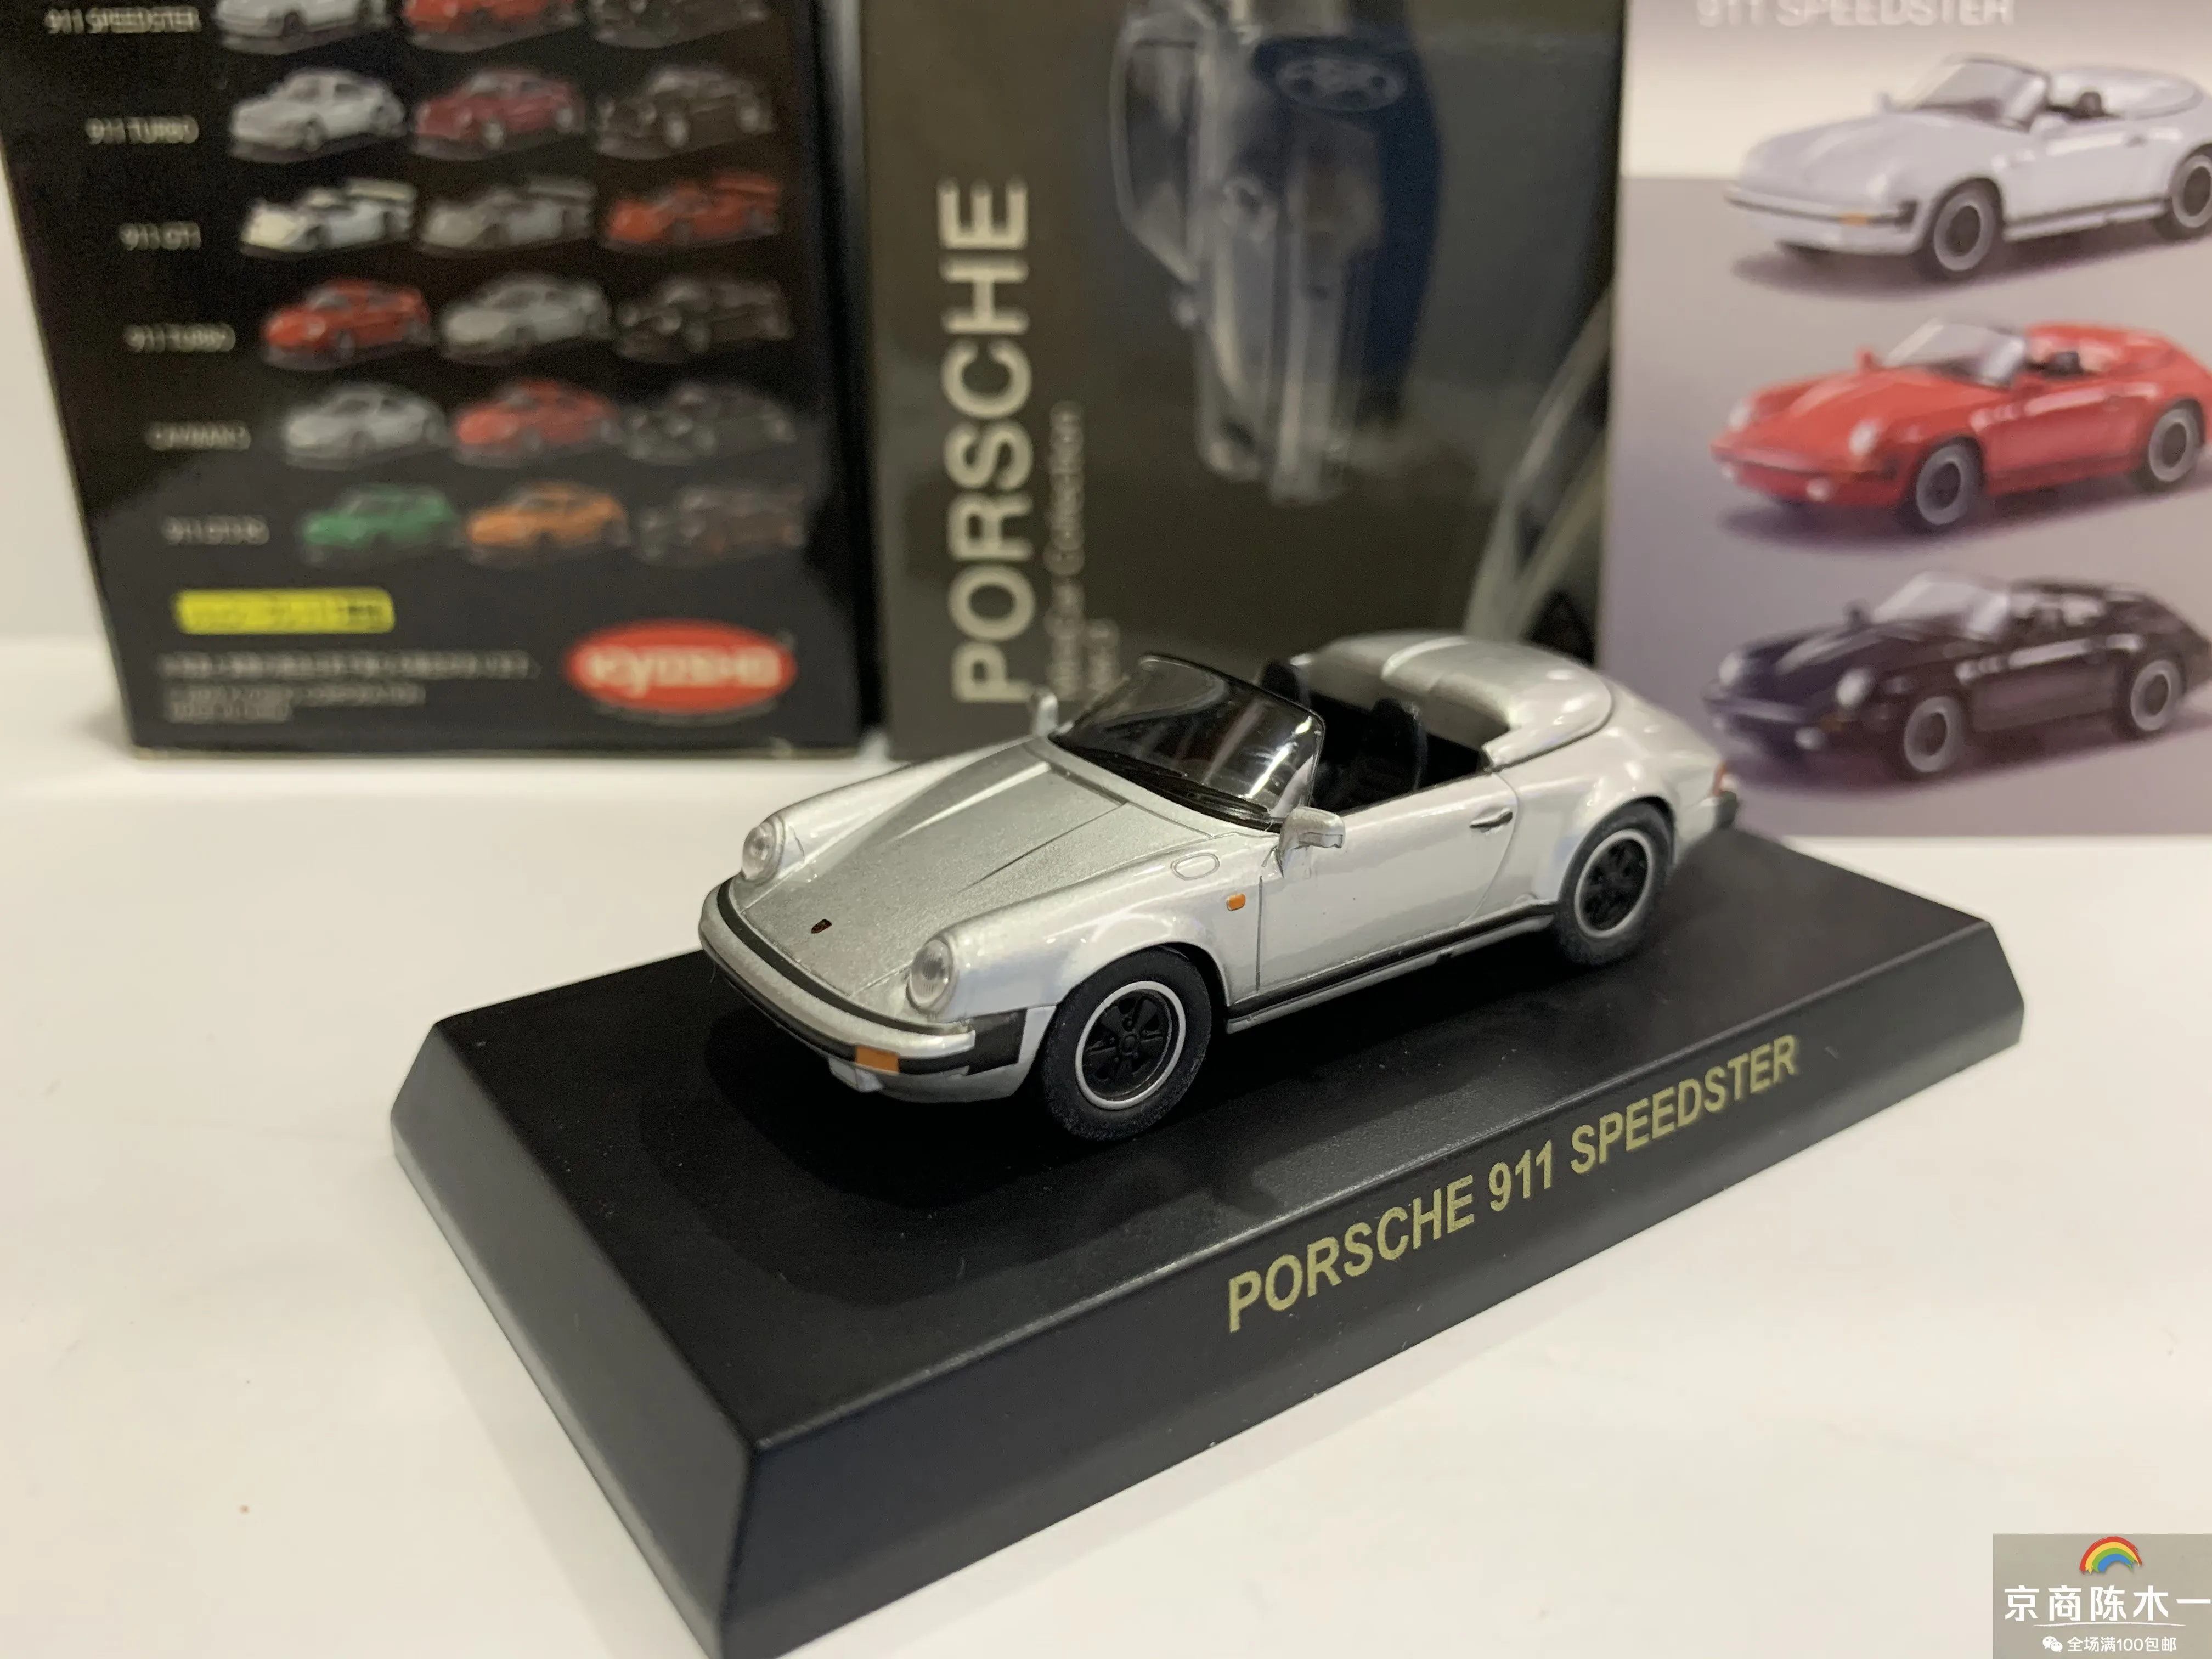 

1/64 KYOSHO PORSCHE 911 Speedster roadster Collection of die cast alloy trolley model ornaments